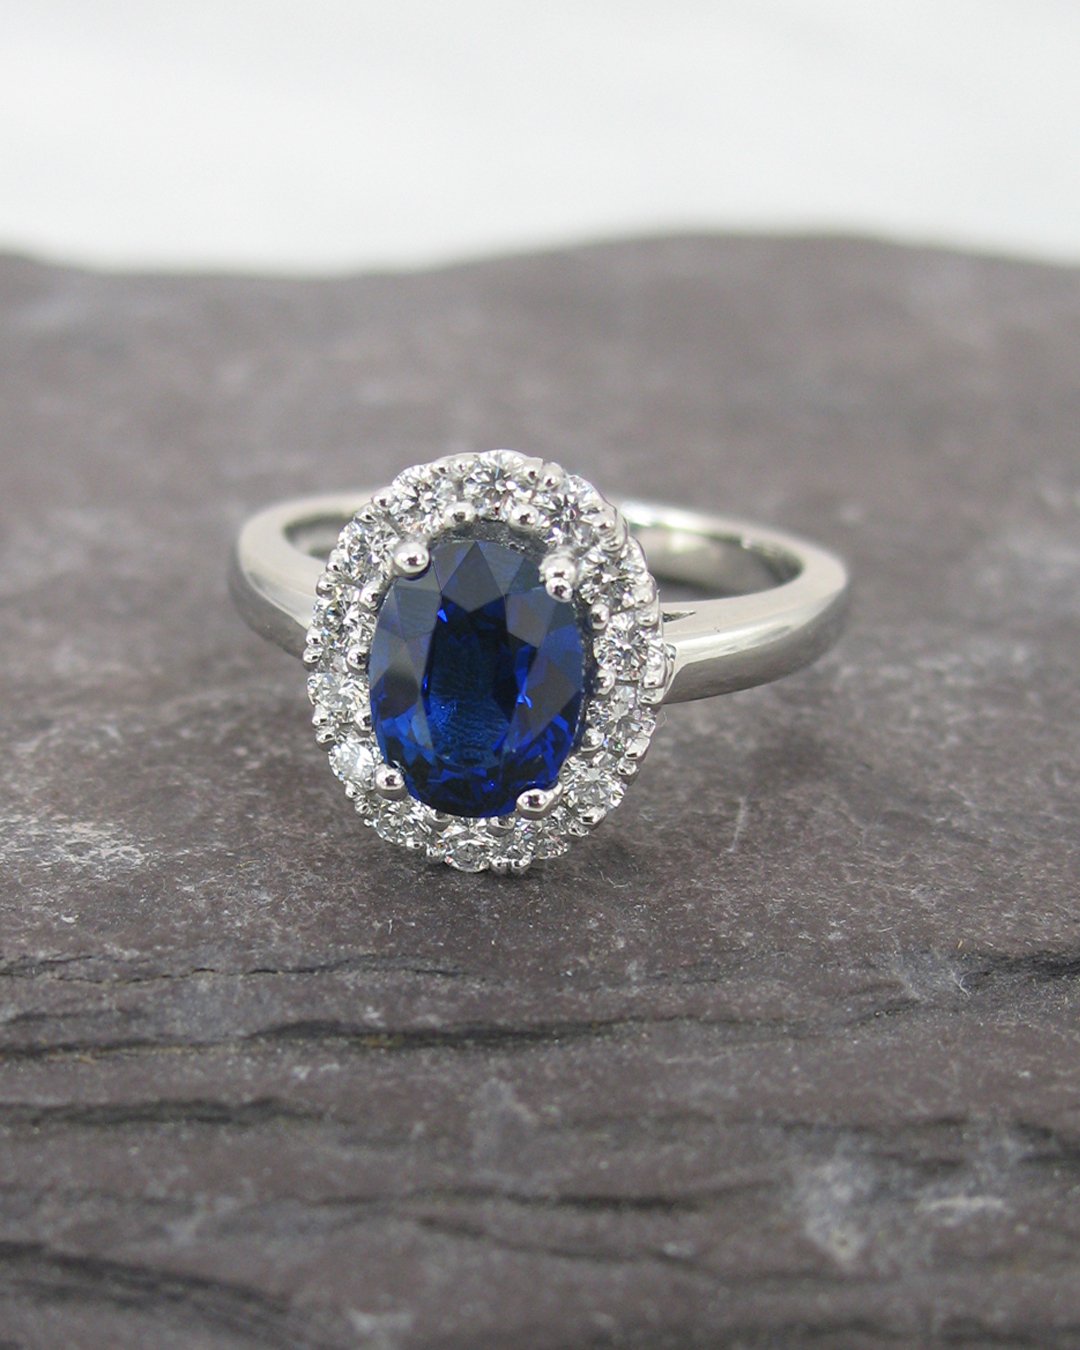 A bespoke blue oval sapphire halo ring